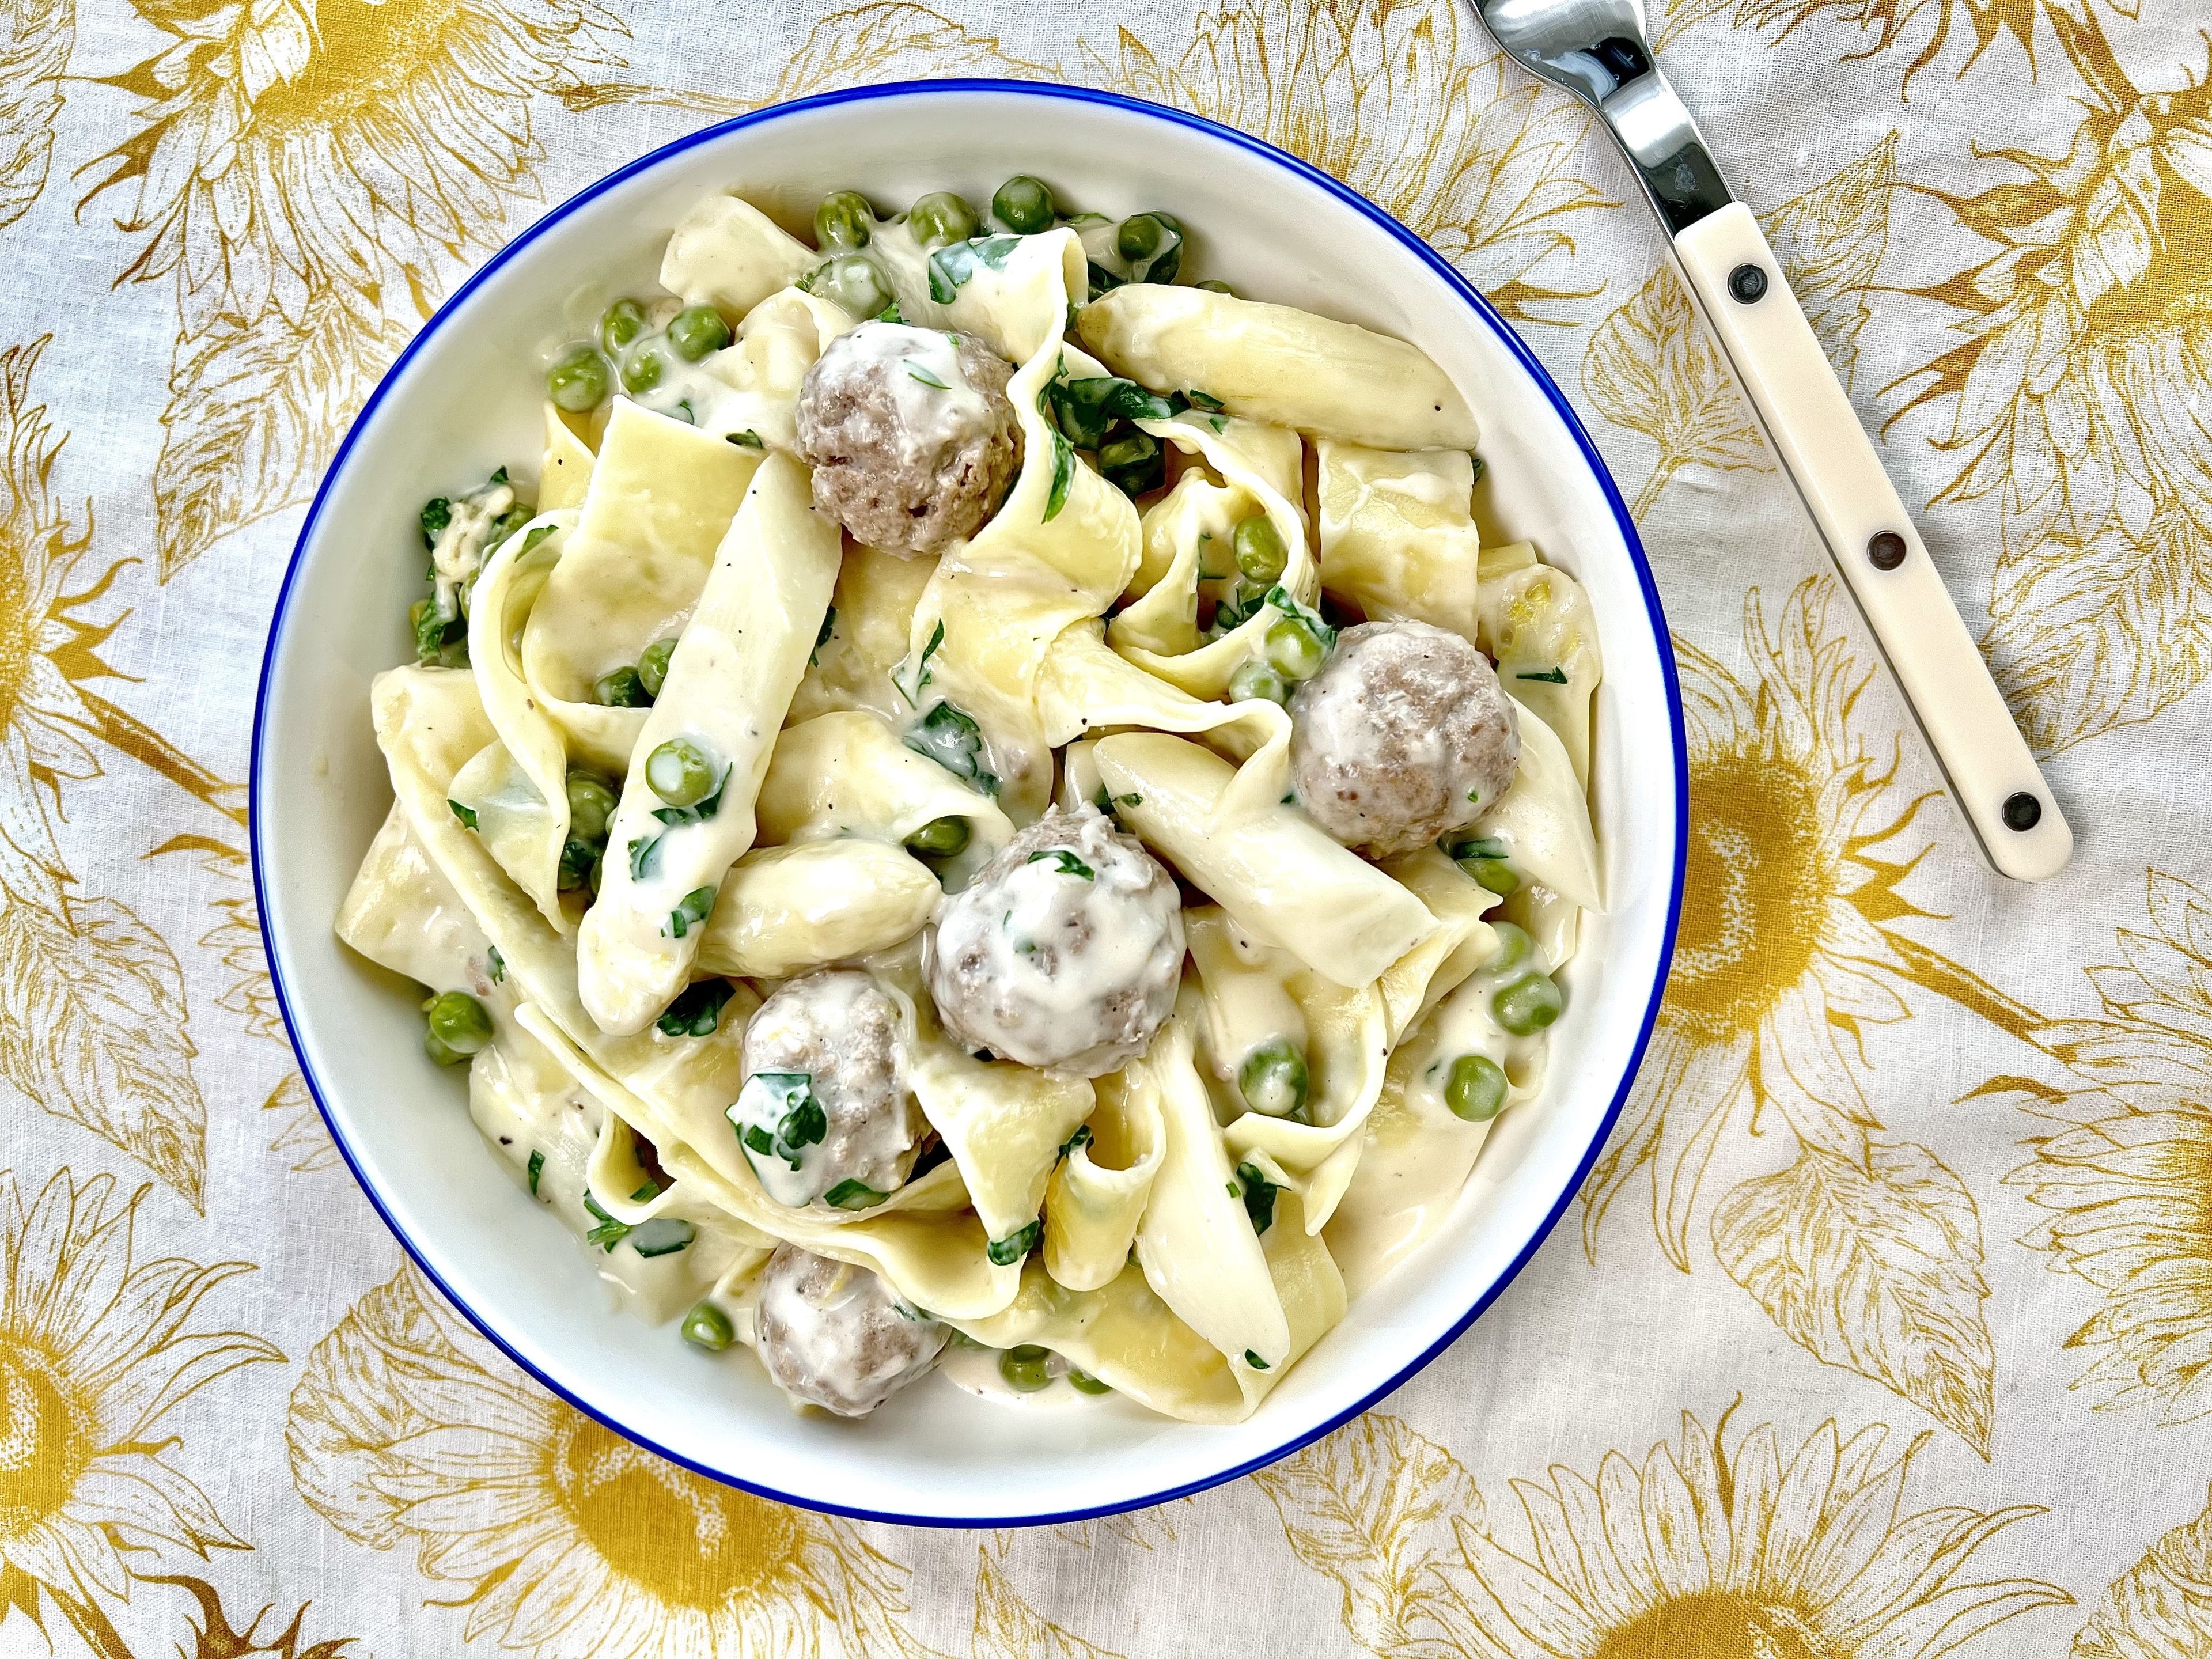 Asparagus pasta with meatballs